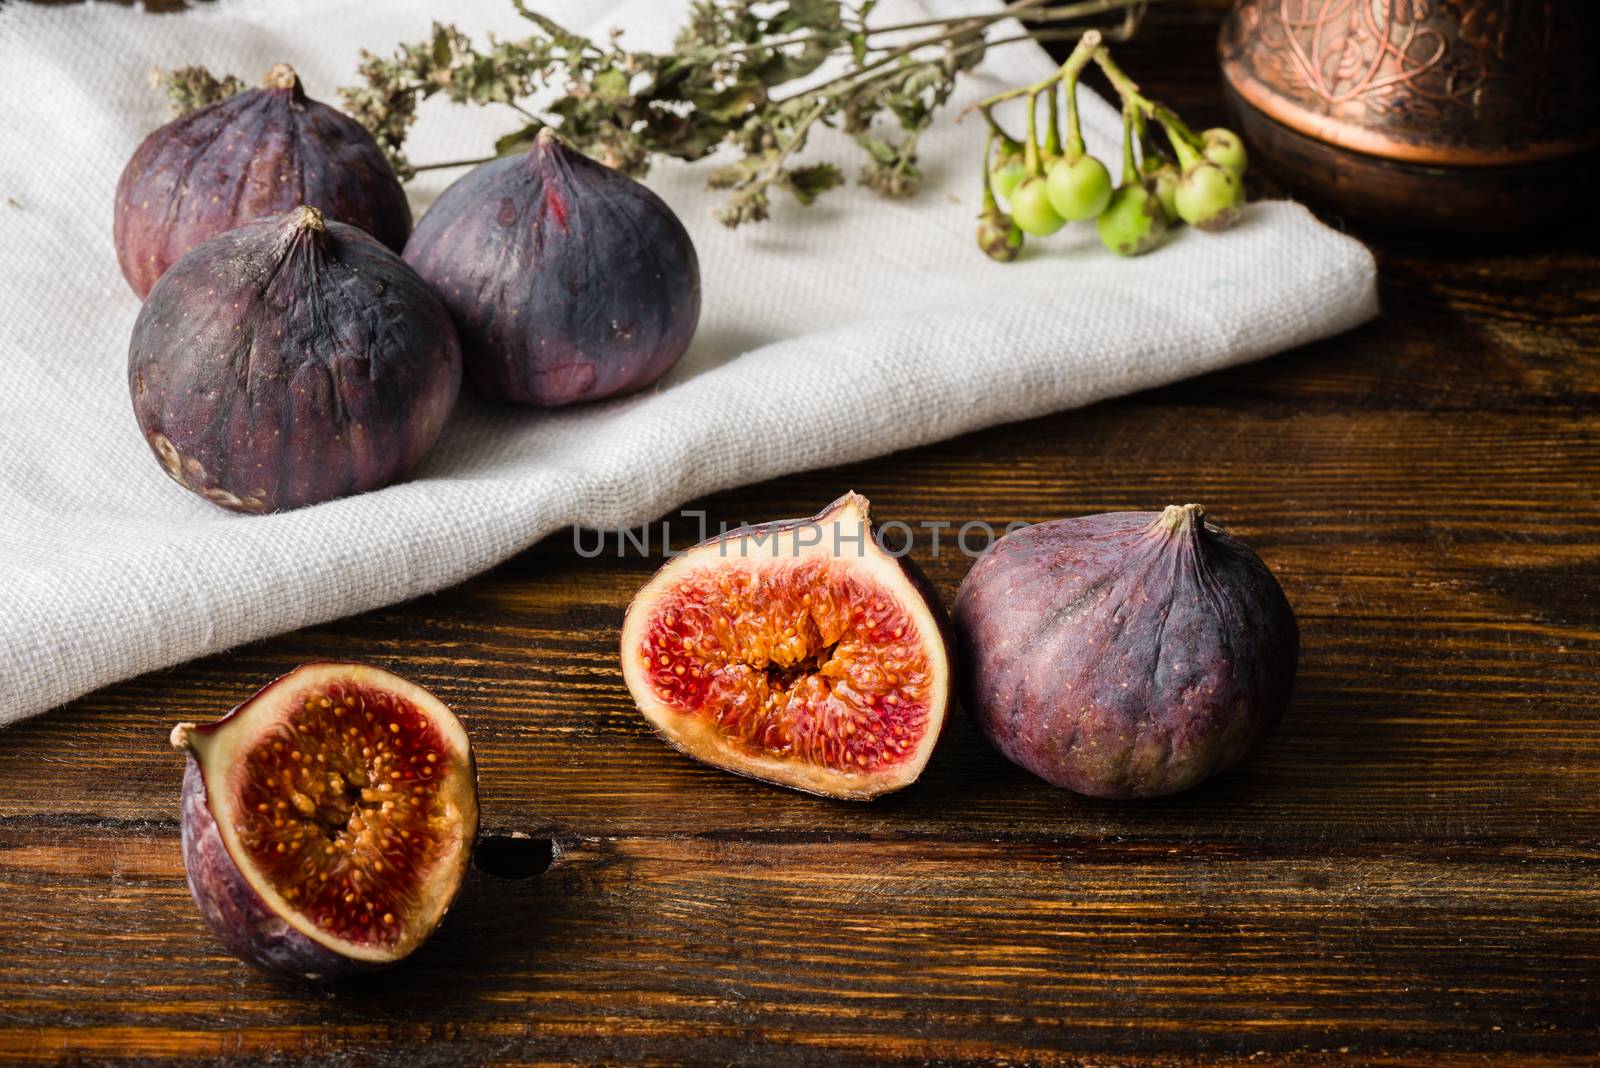 Ripe seasonal figs on the cloth and wooden surface with sliced one